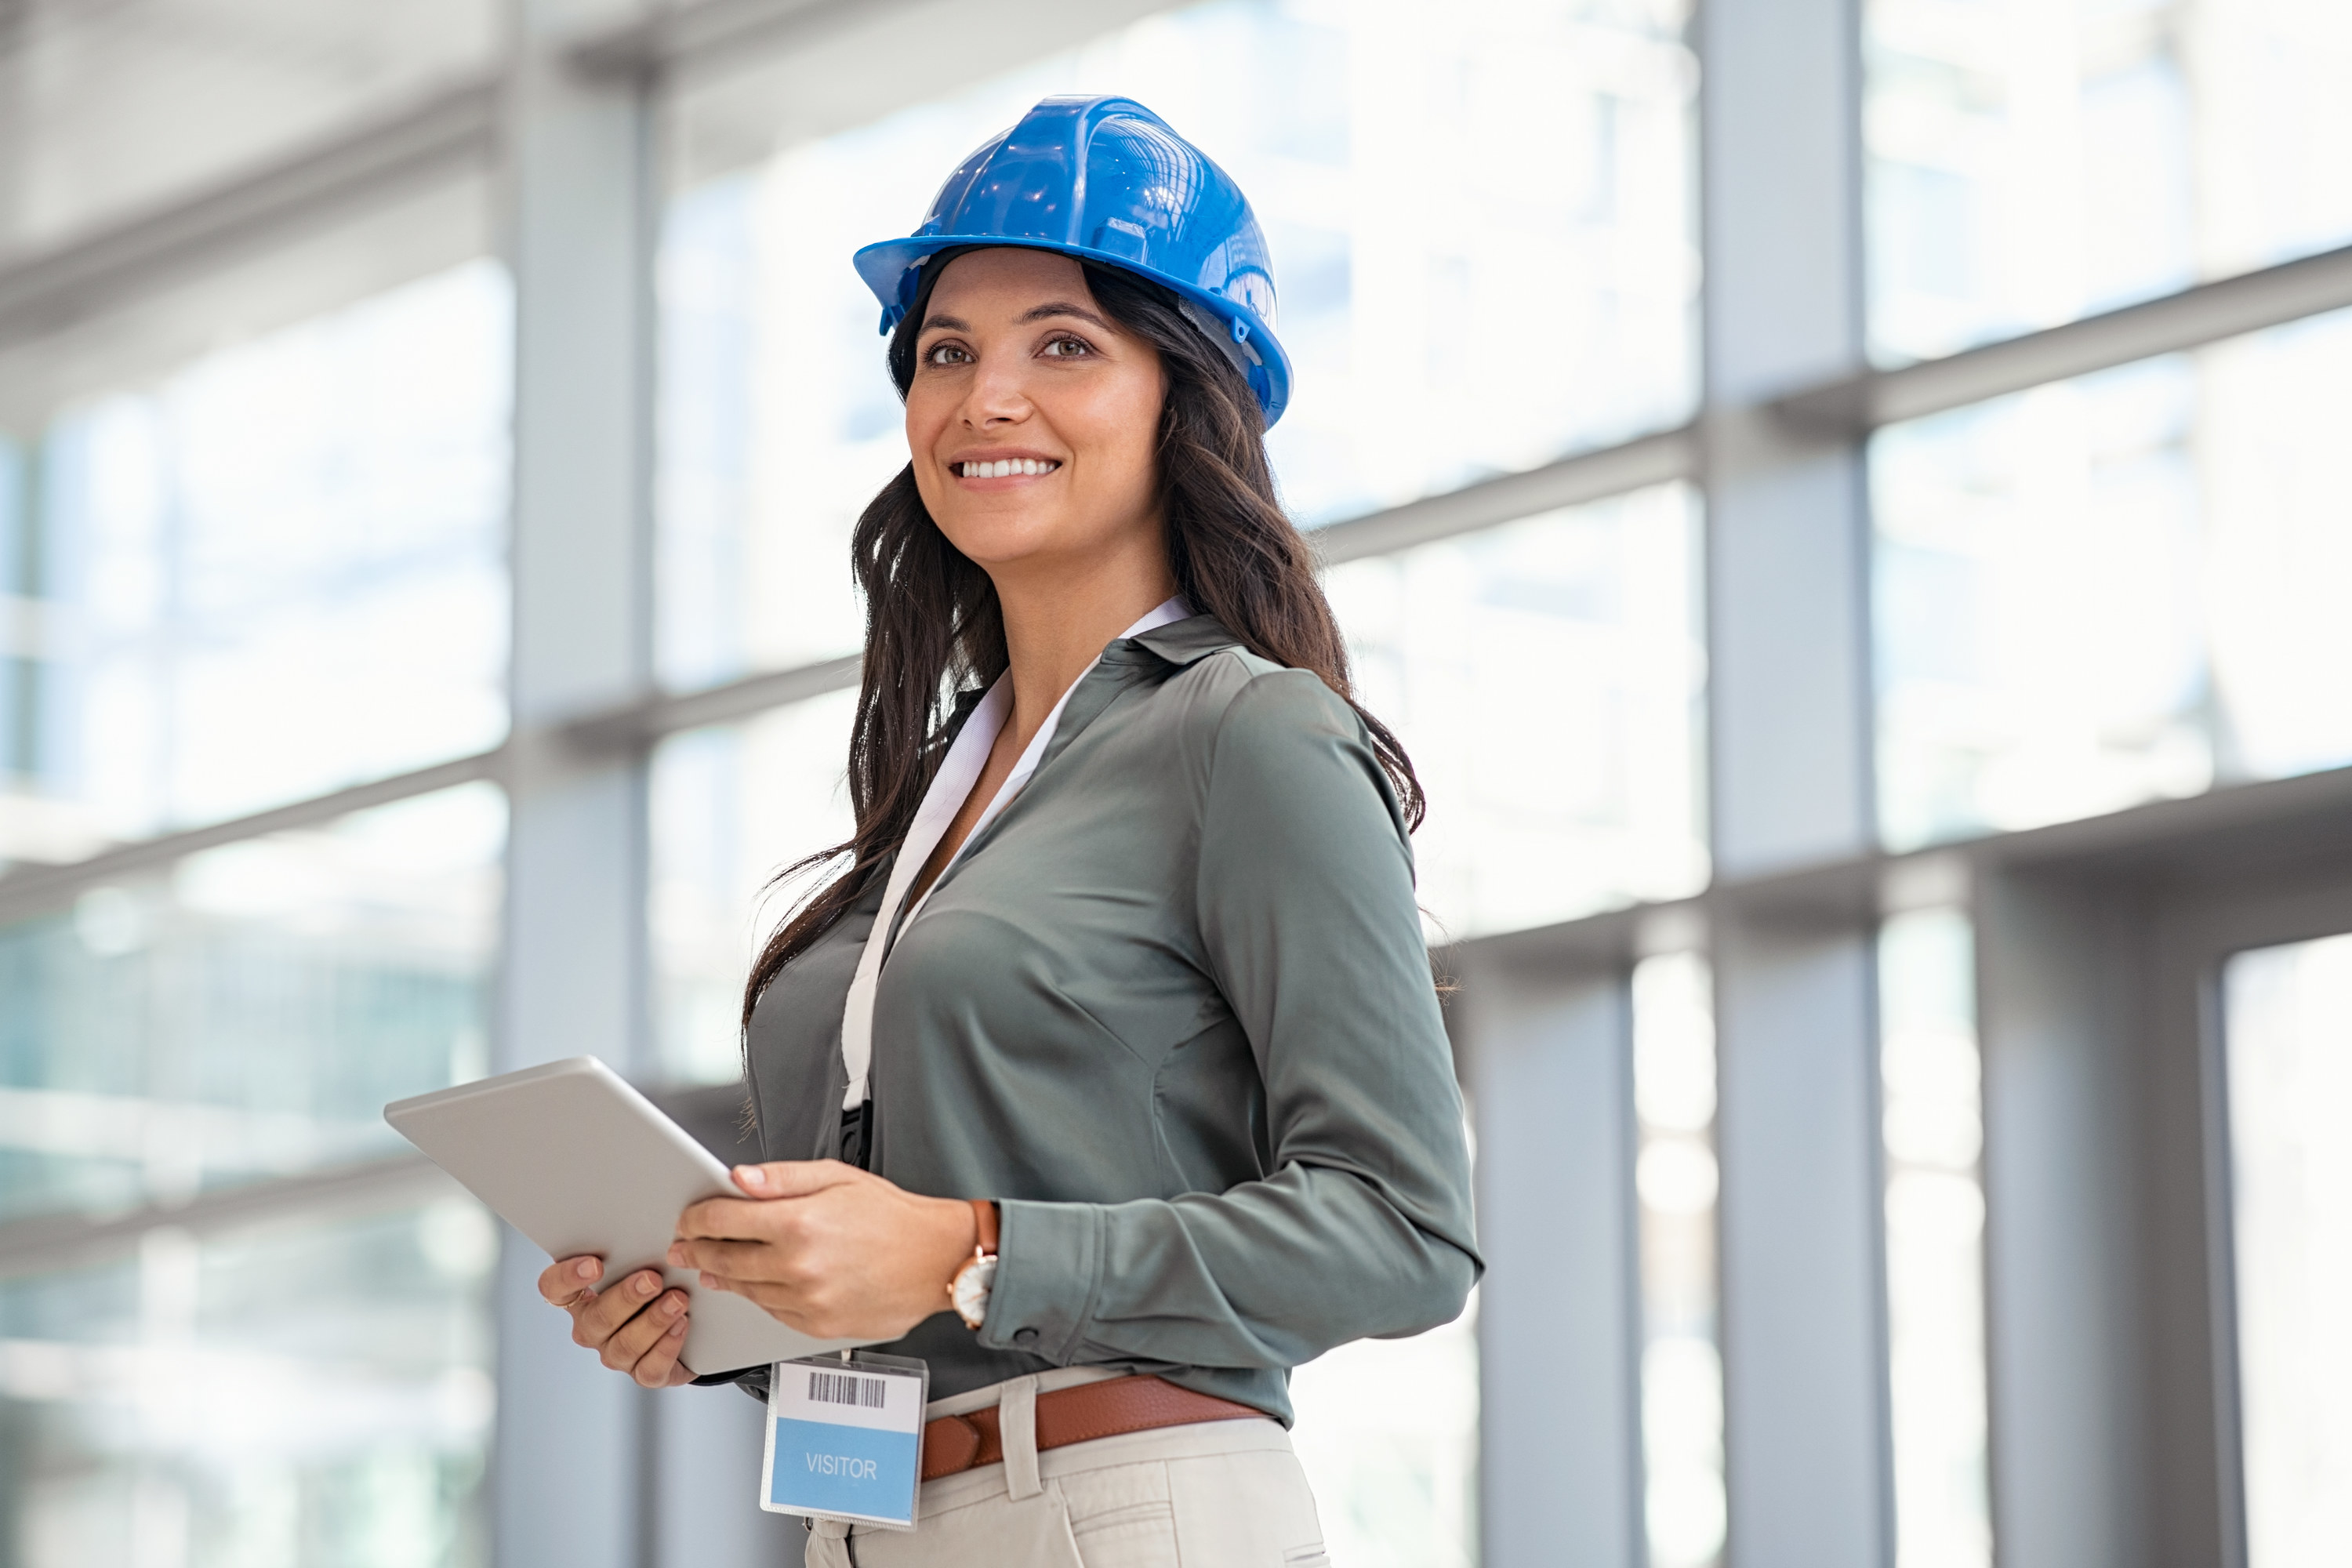 A woman with a safety hat on inside a building